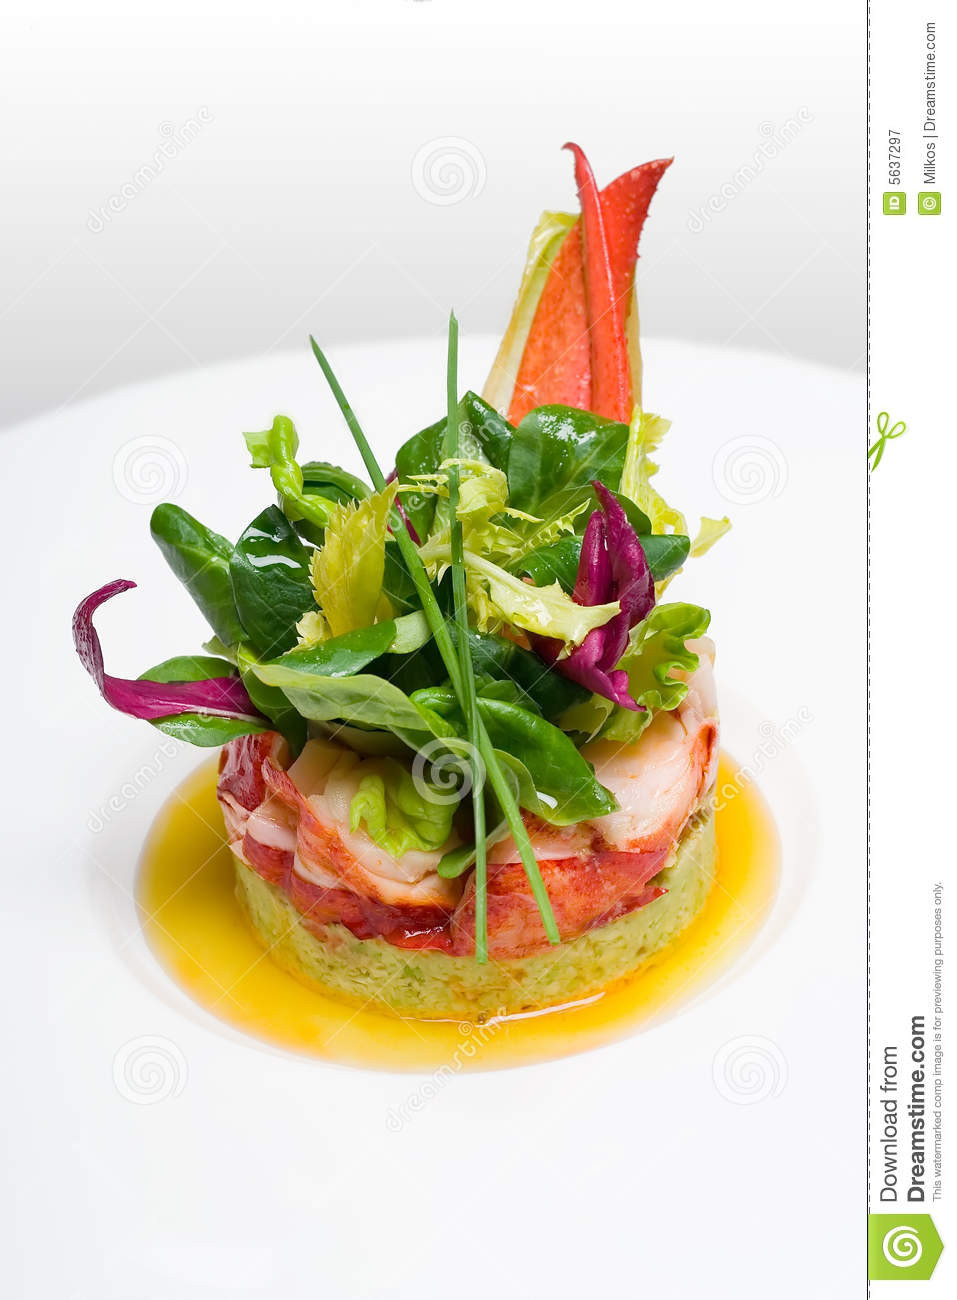 Crab Meat Appetizer
 Crab meat appetizer stock image Image of lunch appetizer